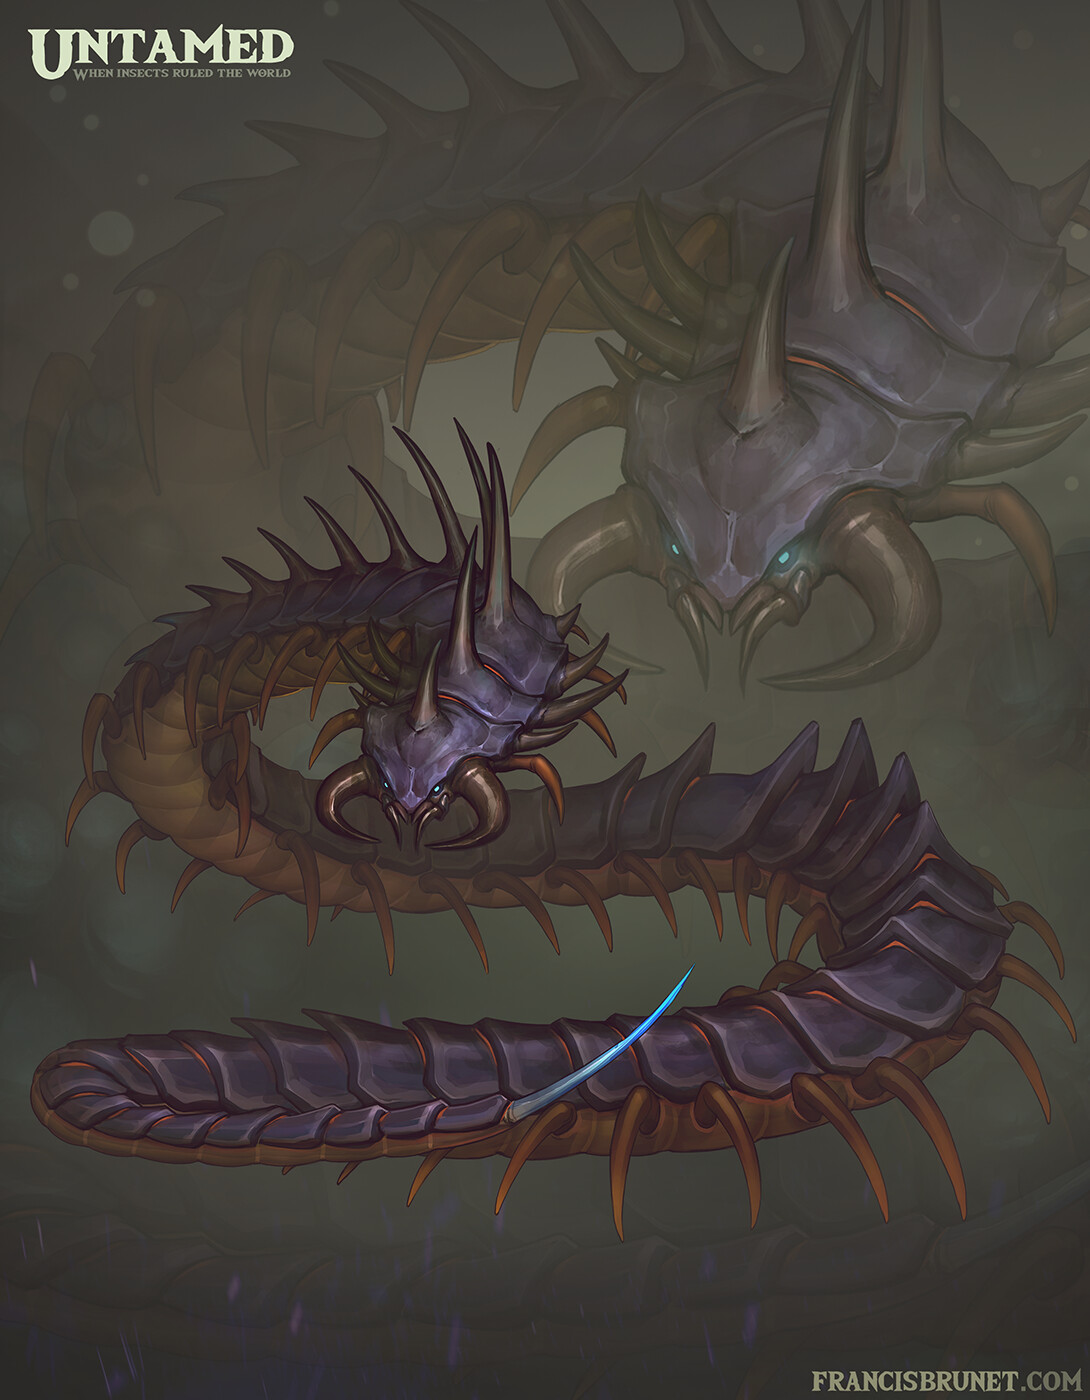 Immortal 
This giant centipede is, as his name suggests, immortal. He can regenerate body parts forever, as long as his brain remains intact. Stubborn and brutal, they only obey to power.